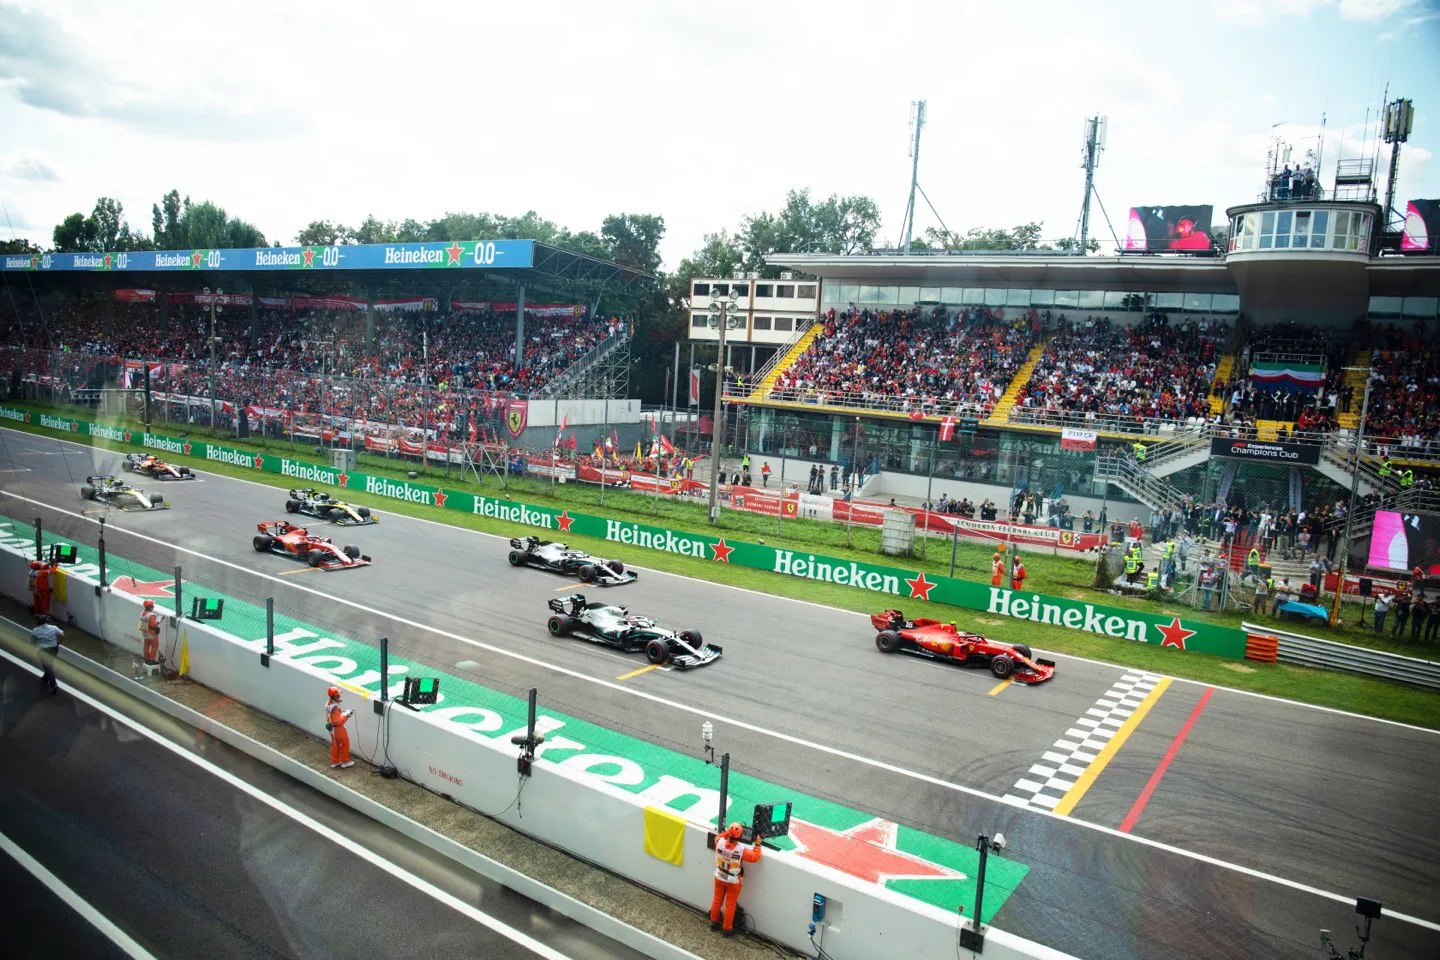 Enjoy the start finish and best views of the race from the F1 Paddock Club and Champions Club